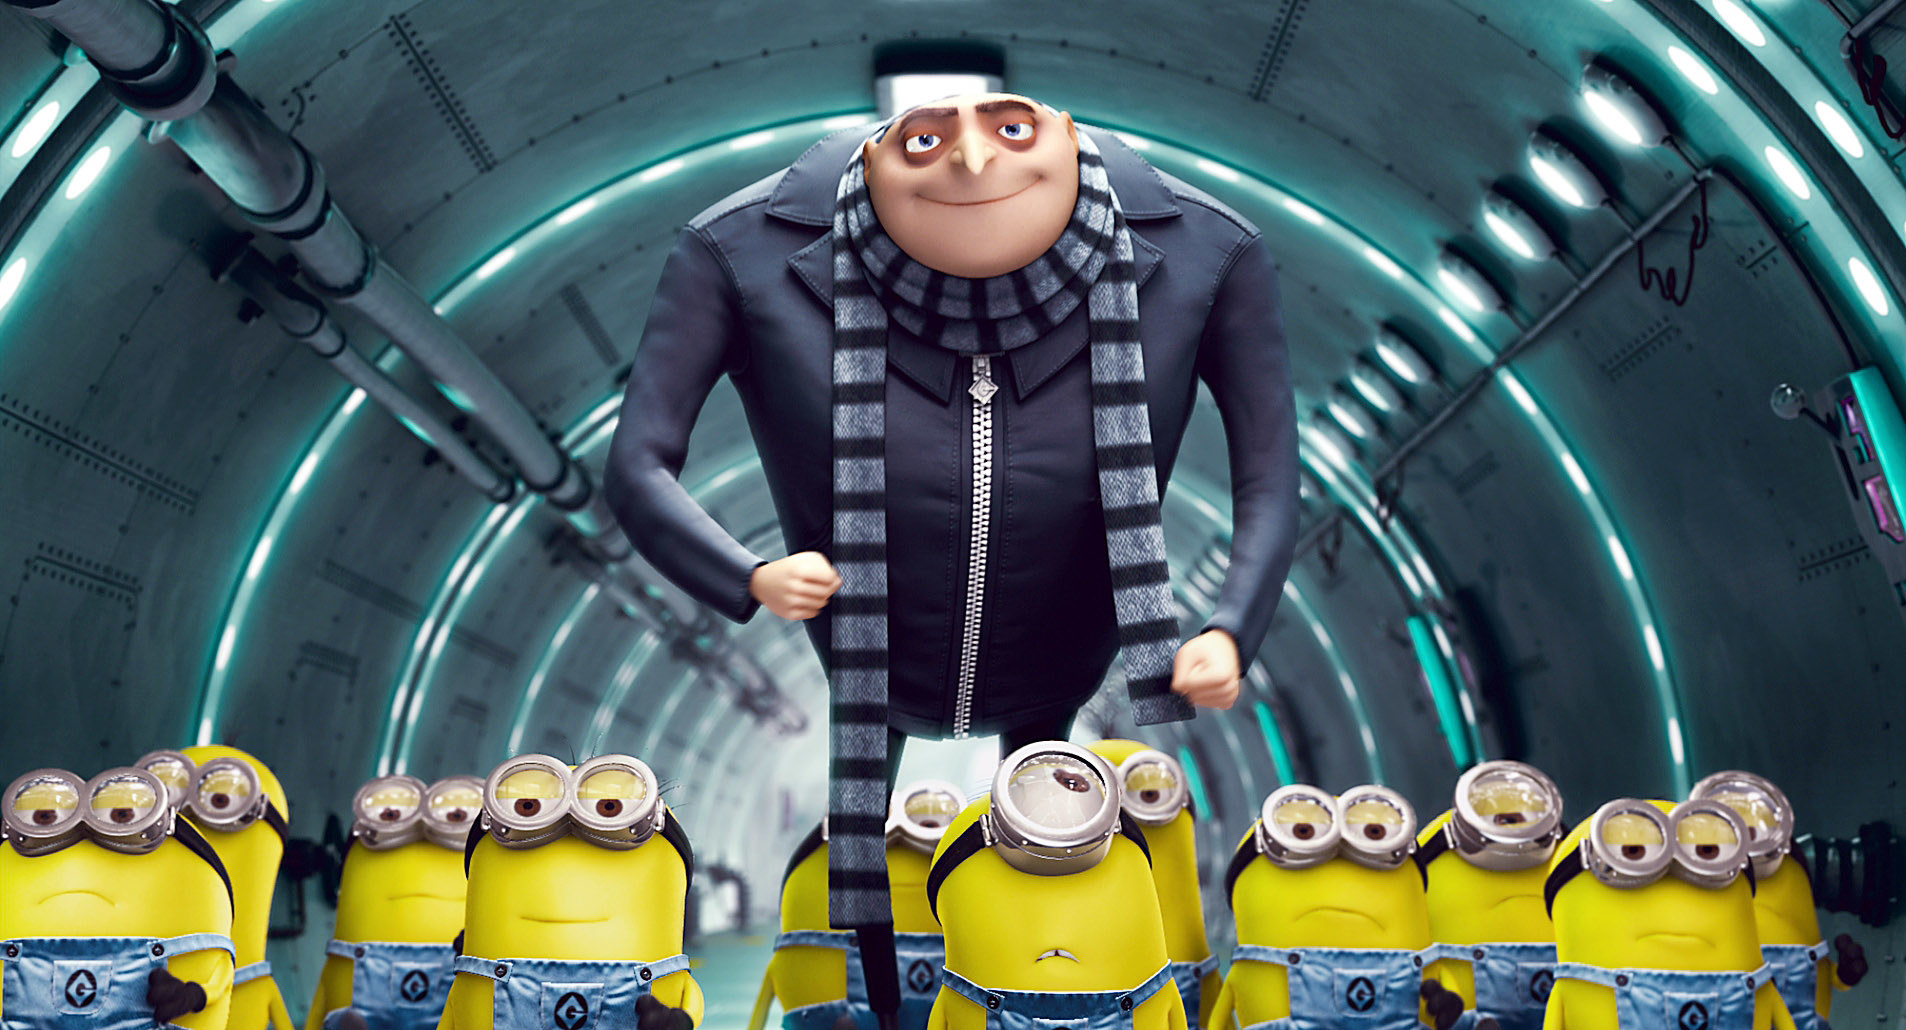 Gru and the minions